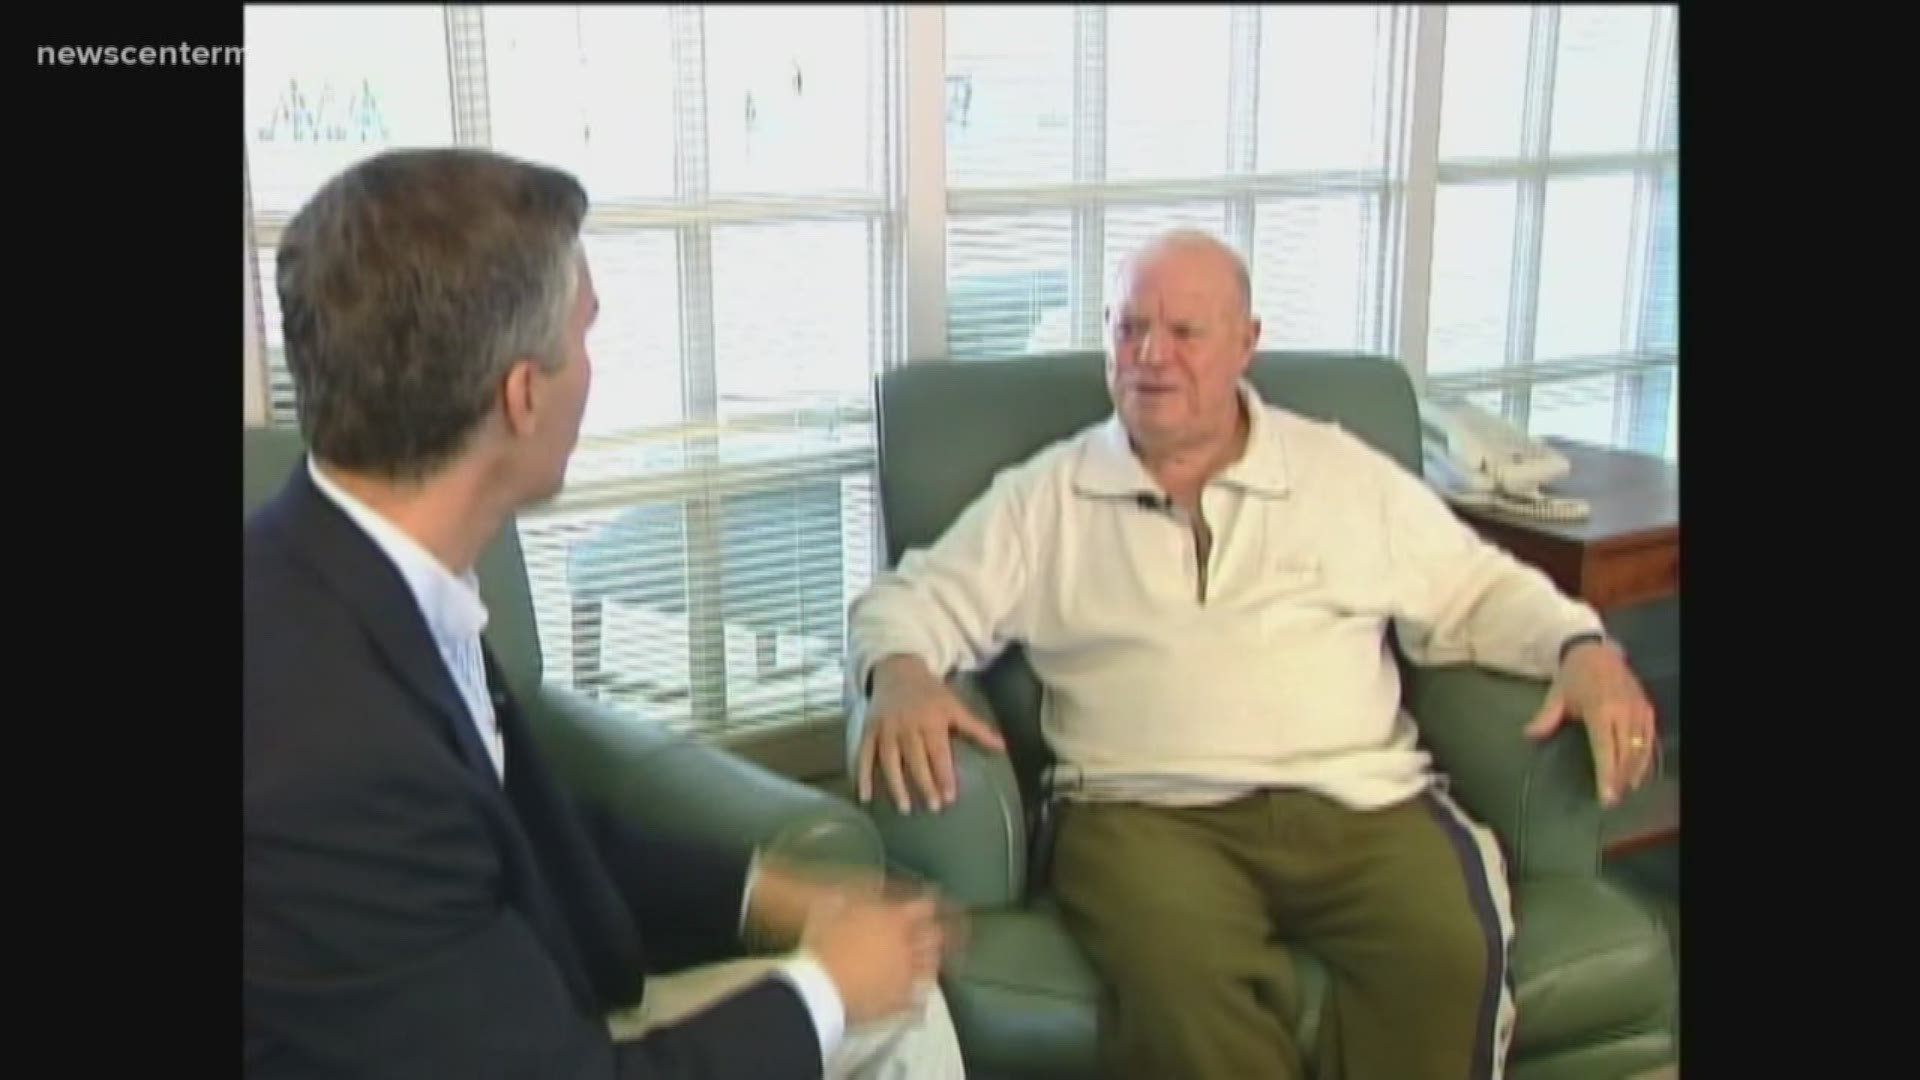 Rob Caldwell sat down with Rickles in 2005 when he arrived in Maine for a show.